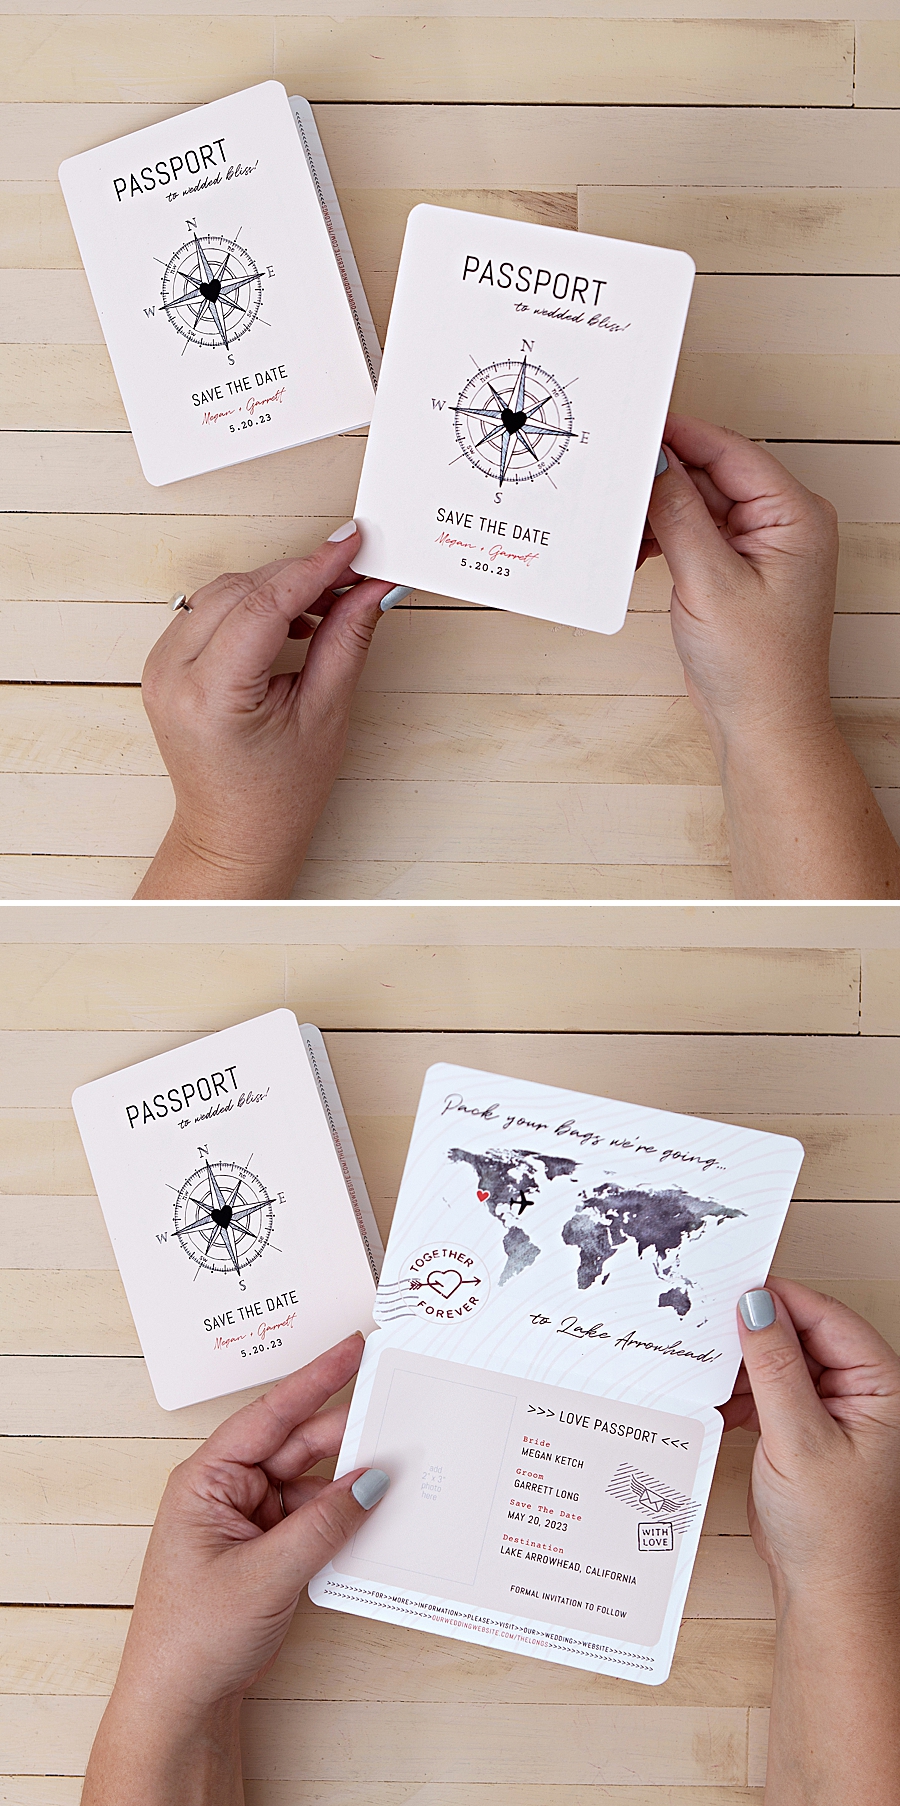 These DIY passport save the dates are beautiful and easy to make!